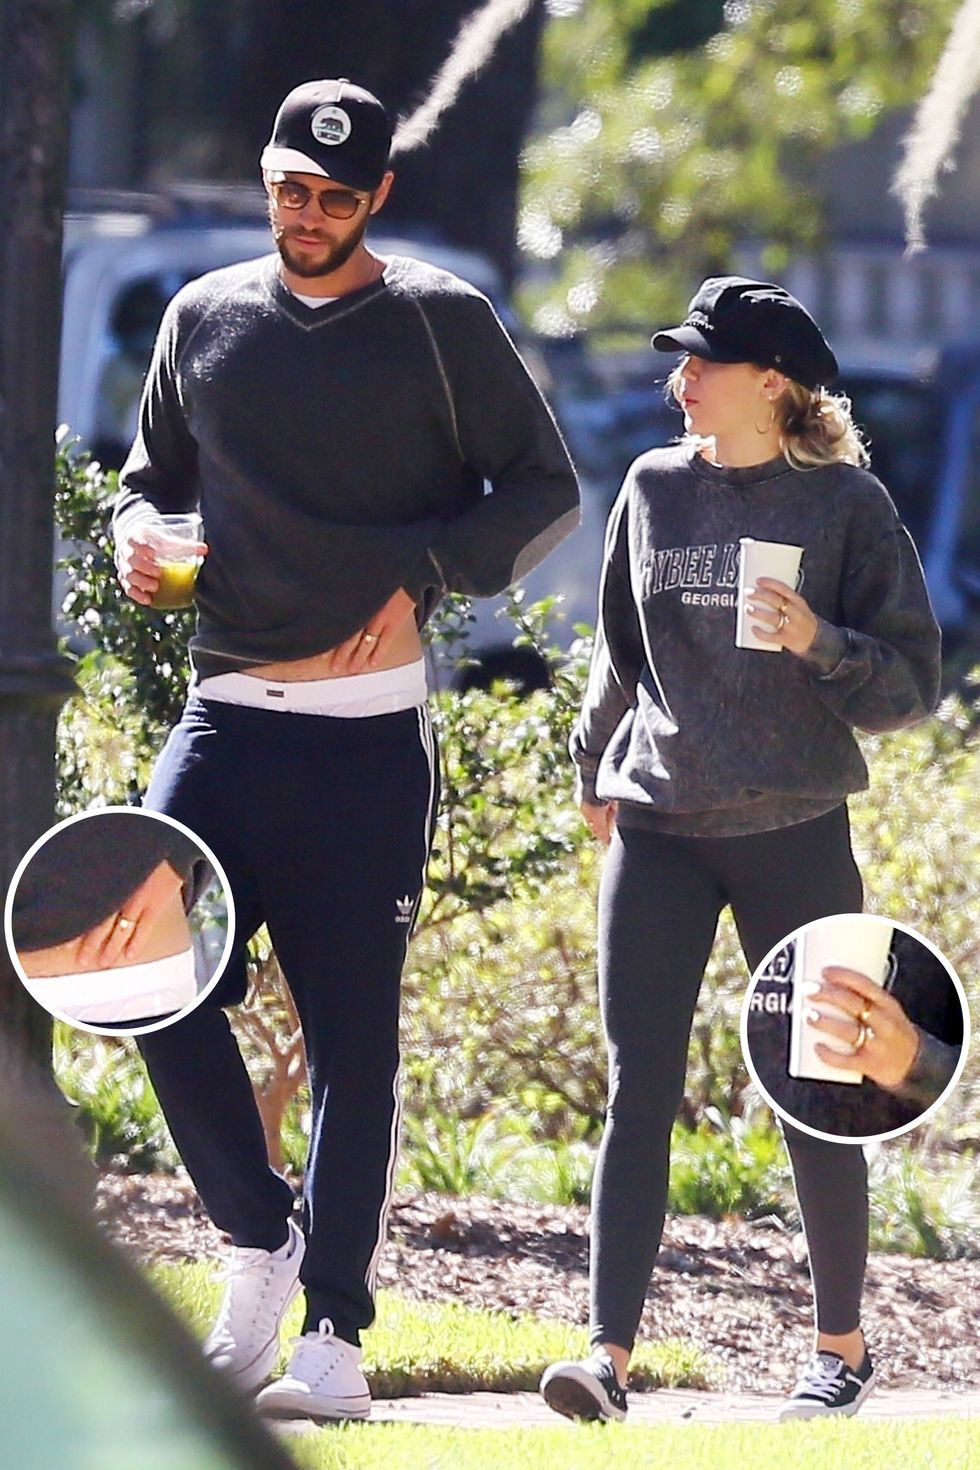 Miley Cyrus and Liam Hemsworth wearing wedding bands